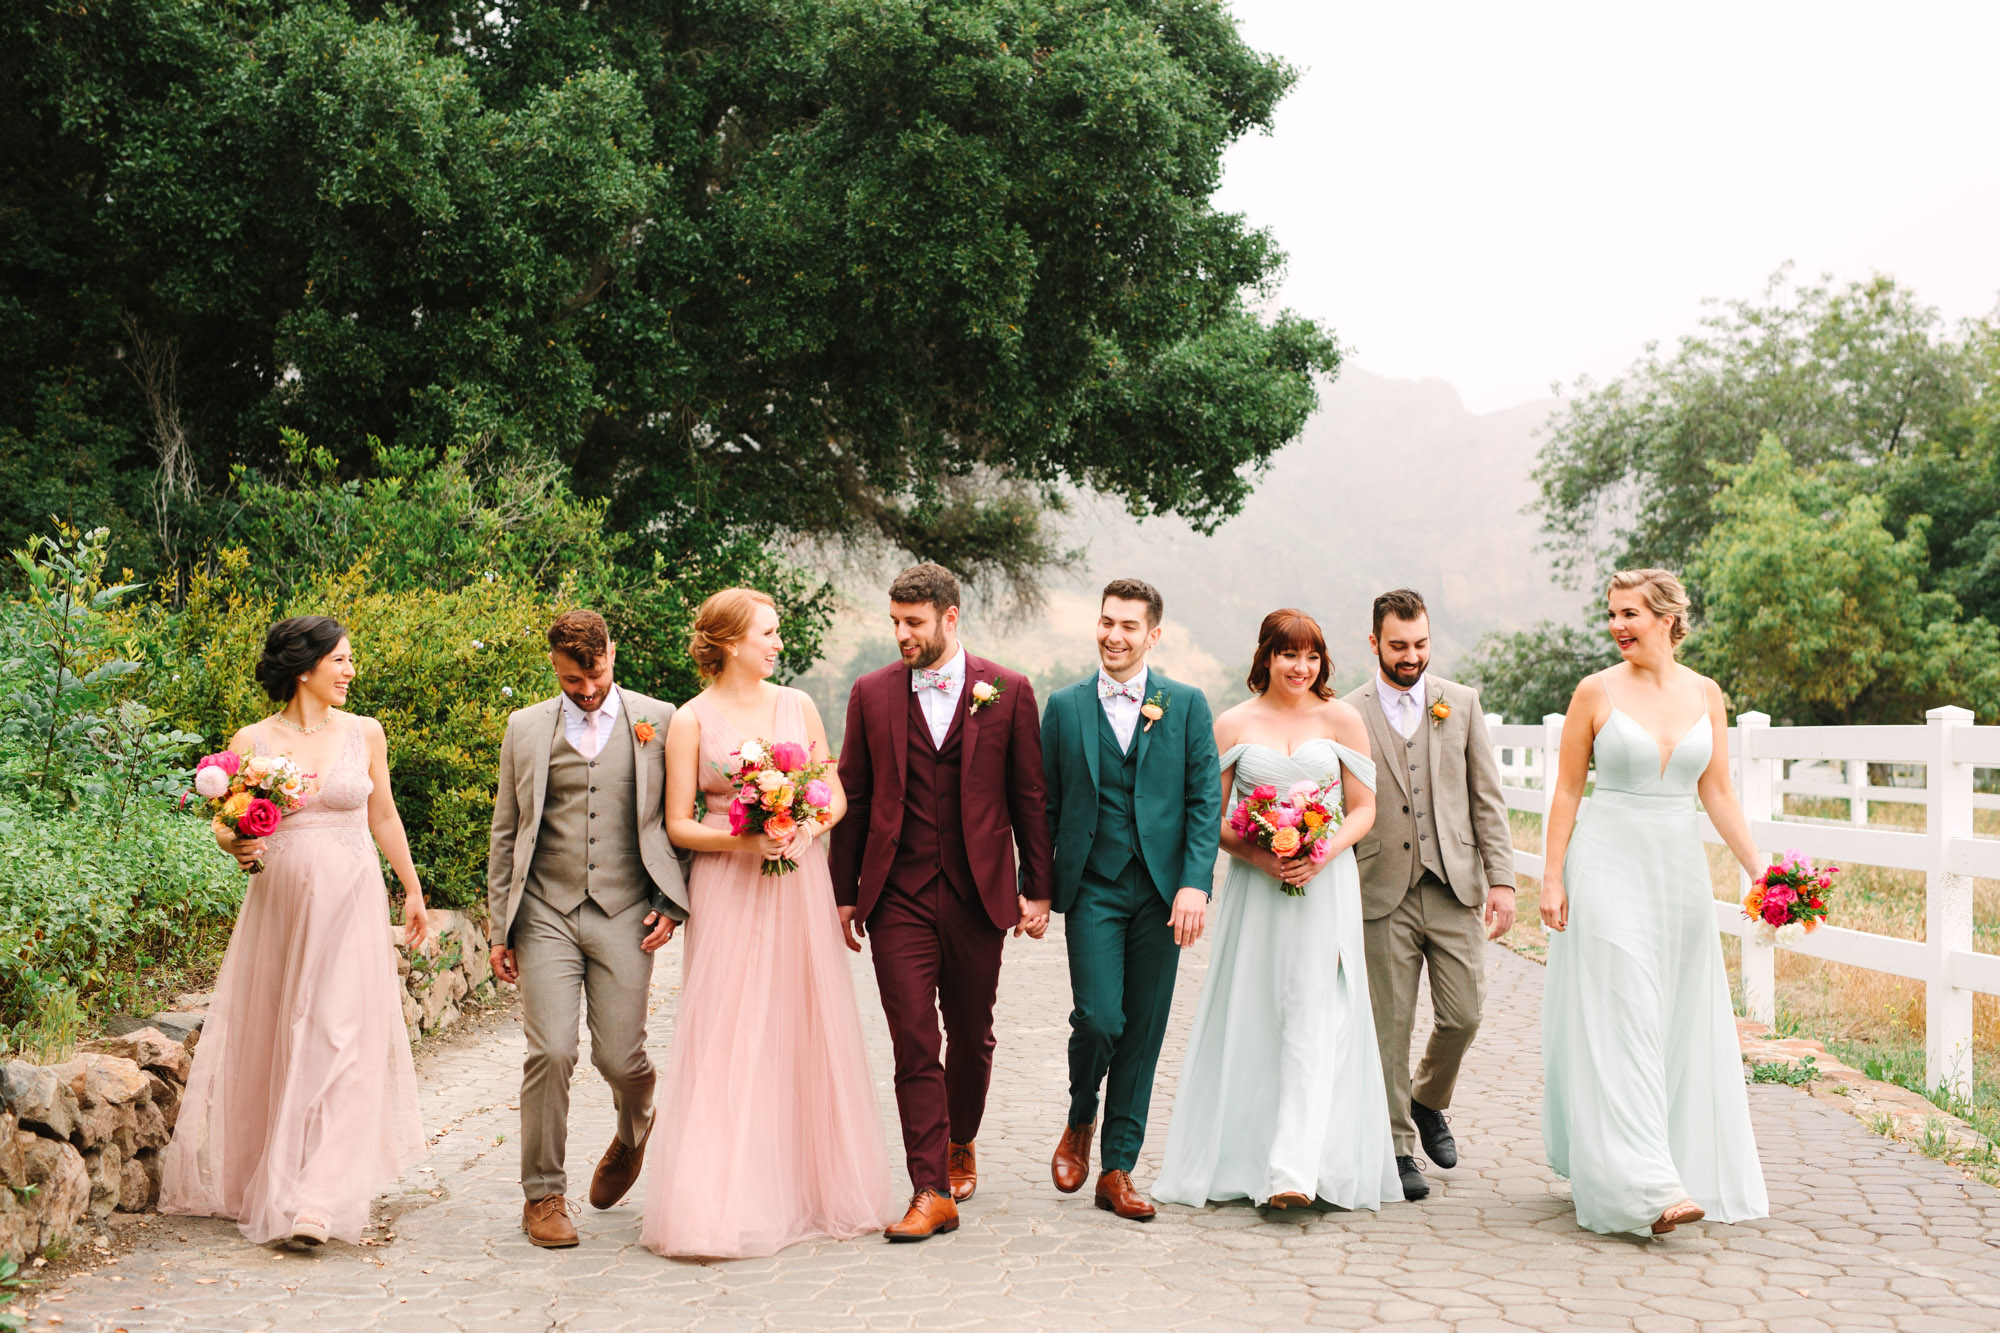 KC and Adam's Malibu Wedding Party by Mary Costa Photography